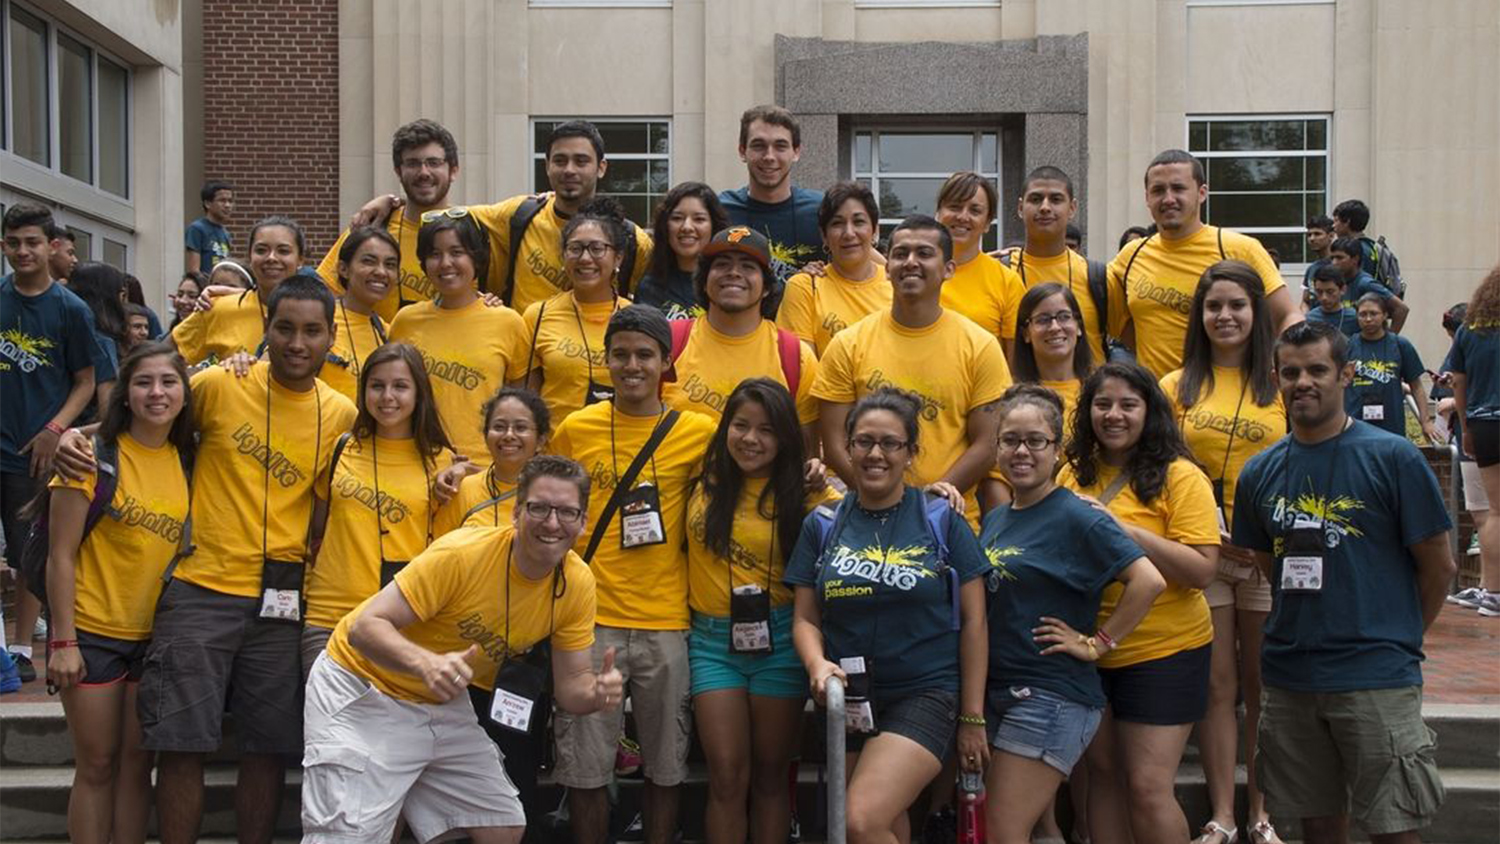 A group of students in yellow shirts